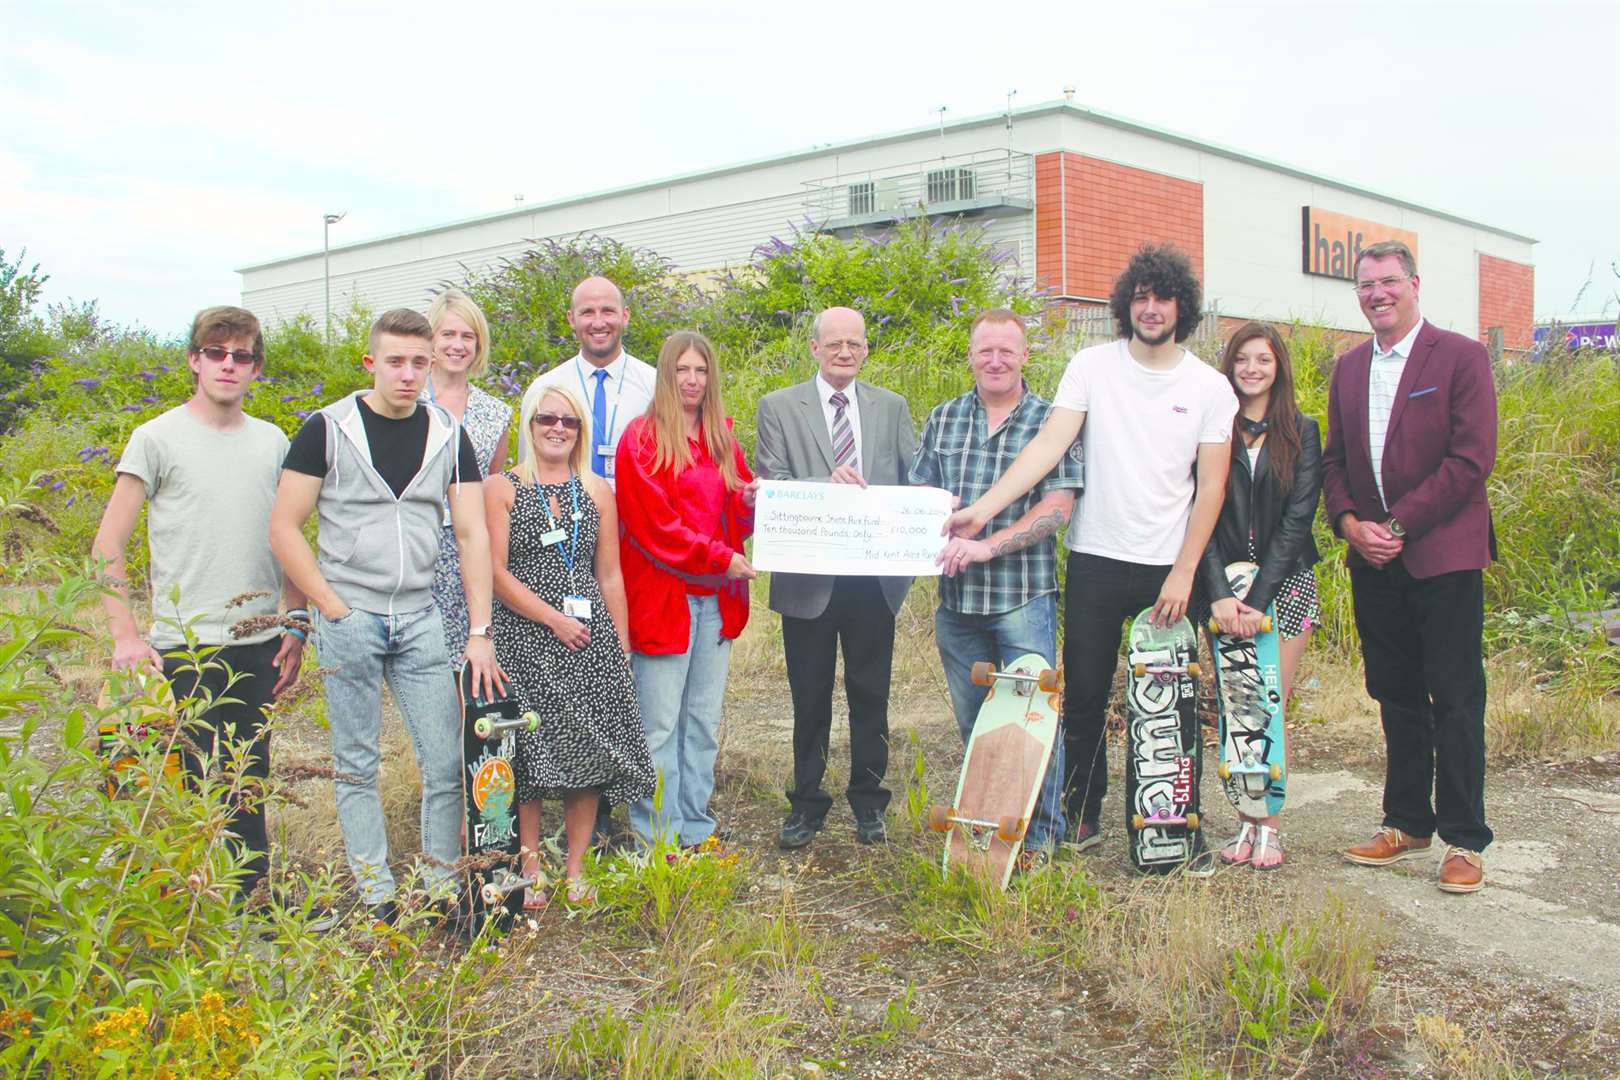 Cllr Mike Whiting (far right) with members of Sittingbourne Skate Park Fundraising Group and representatives from housing association AmicusHorizon, now Optivo